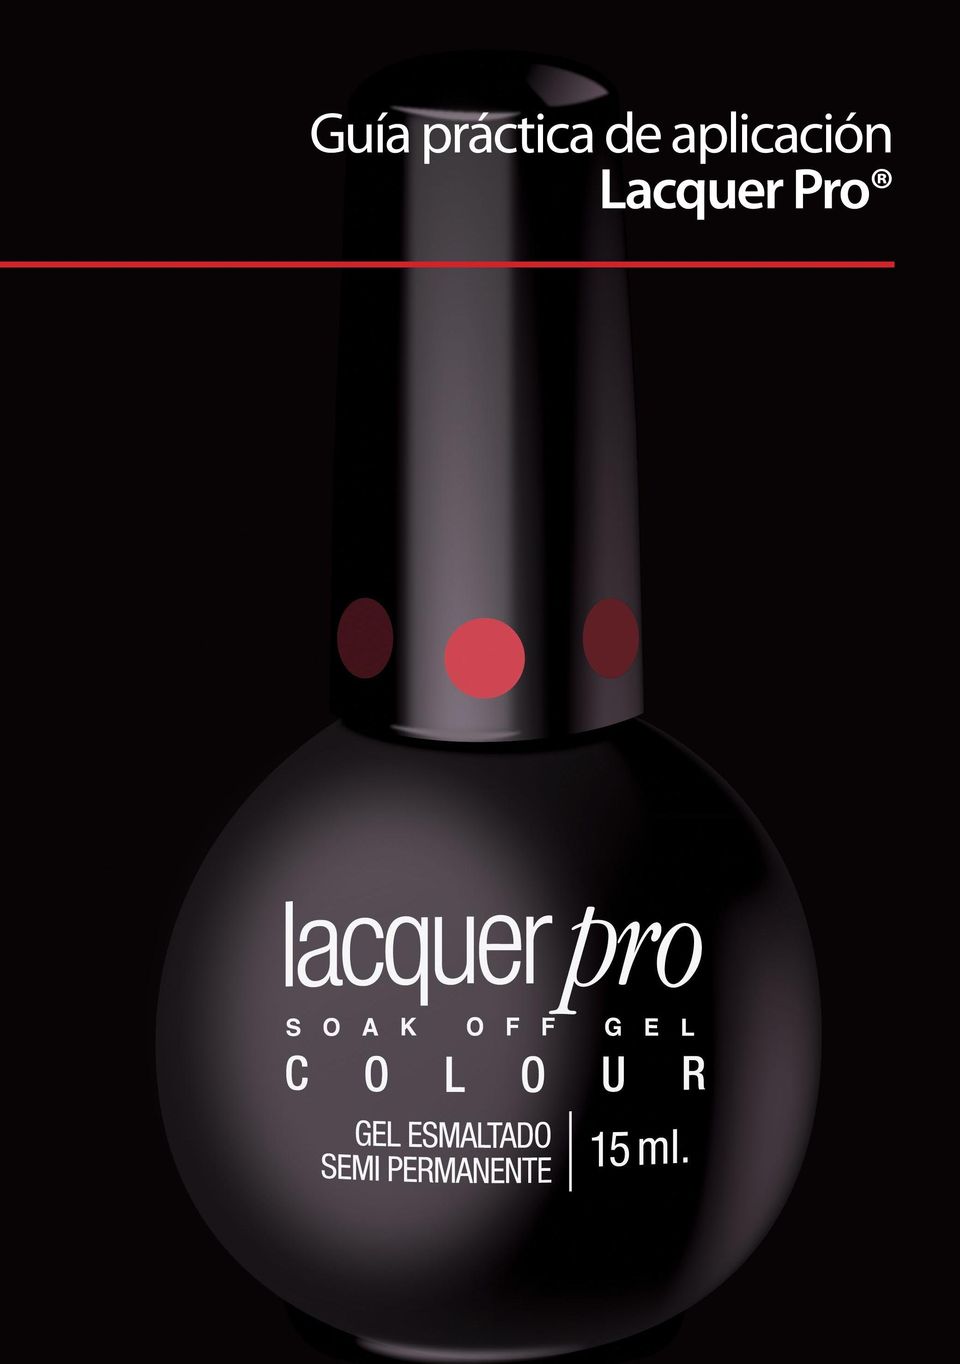 Lacquer Pro www.